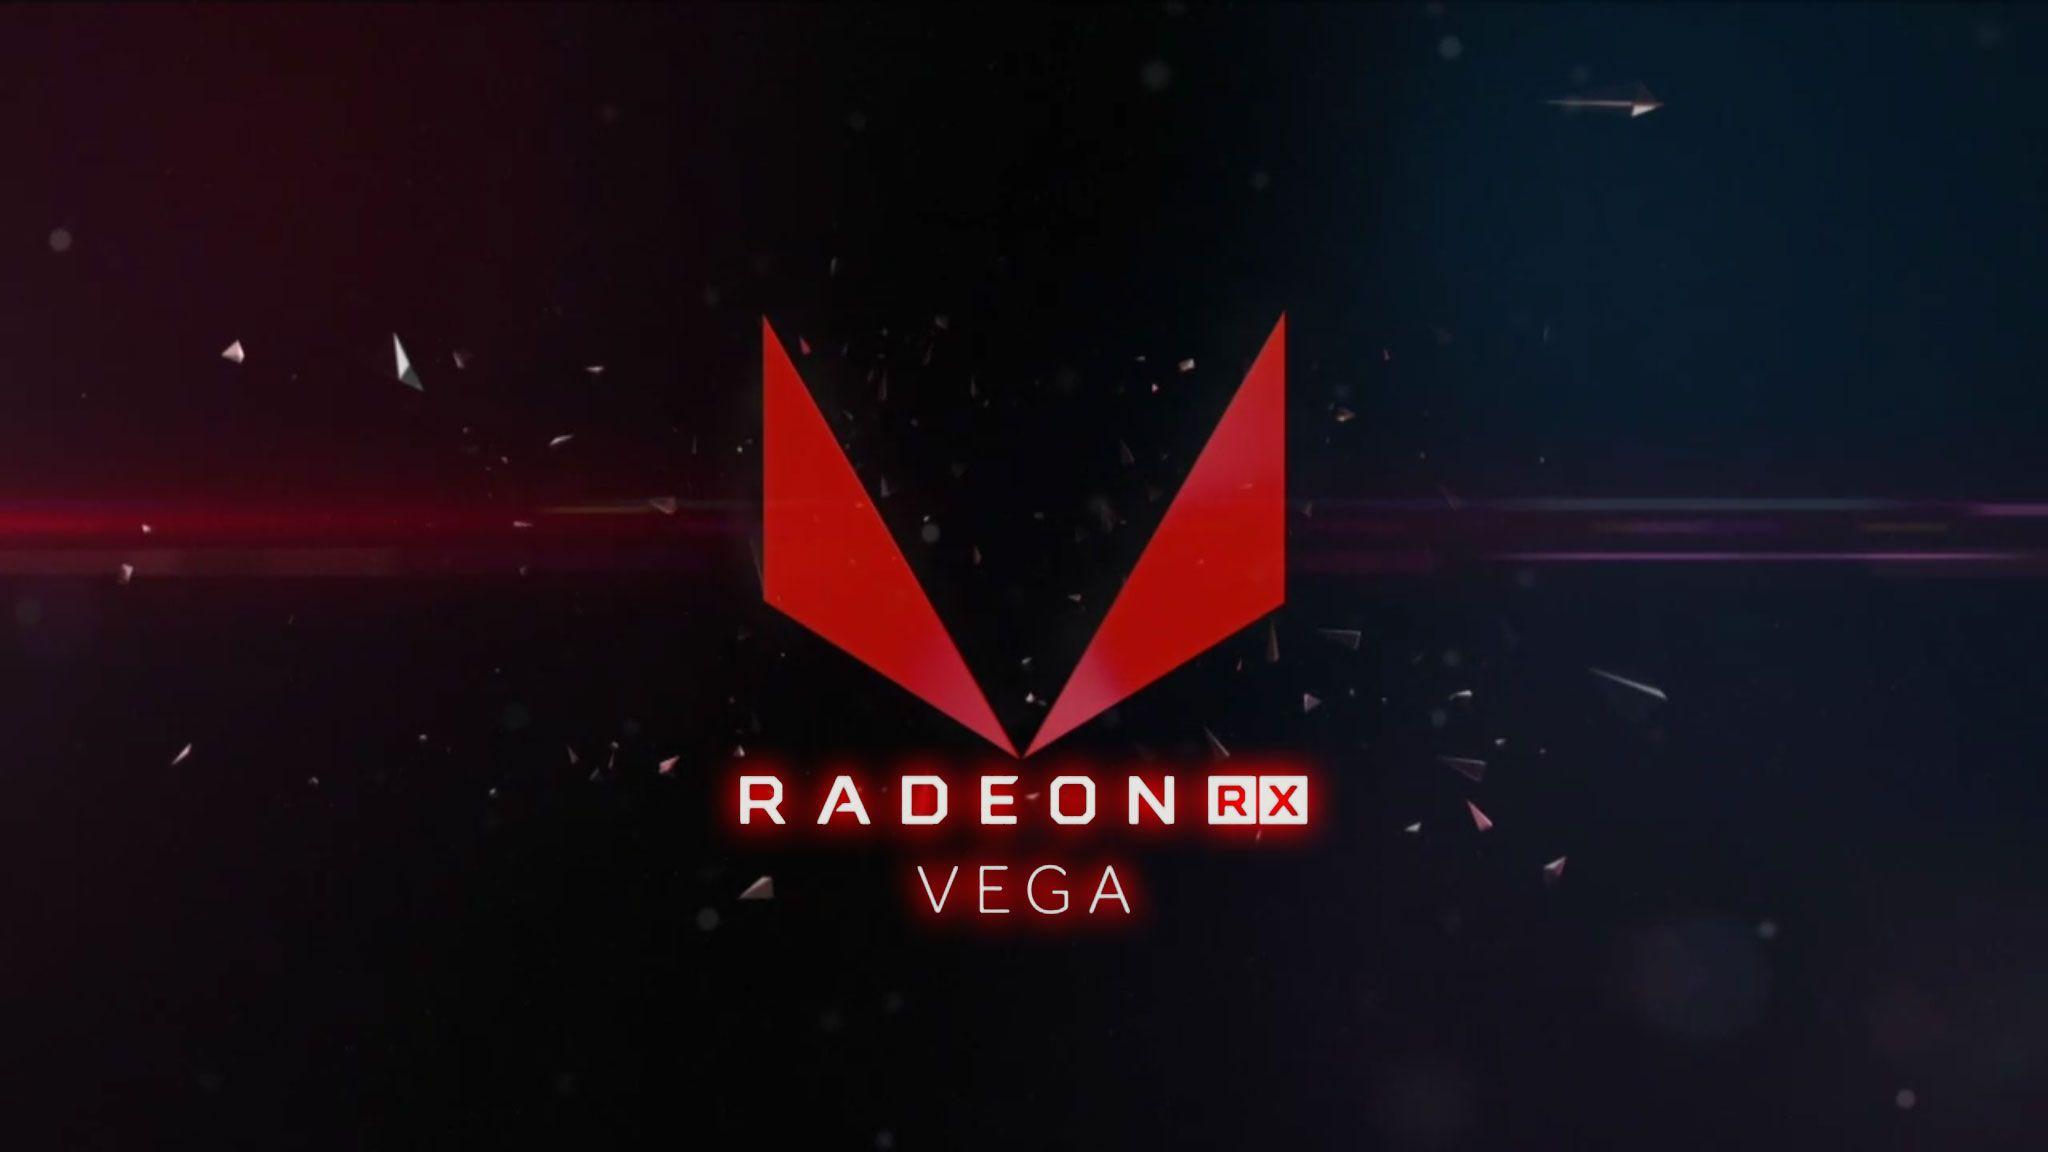 AMD RX Vega will come in 4GB and 8GB variants